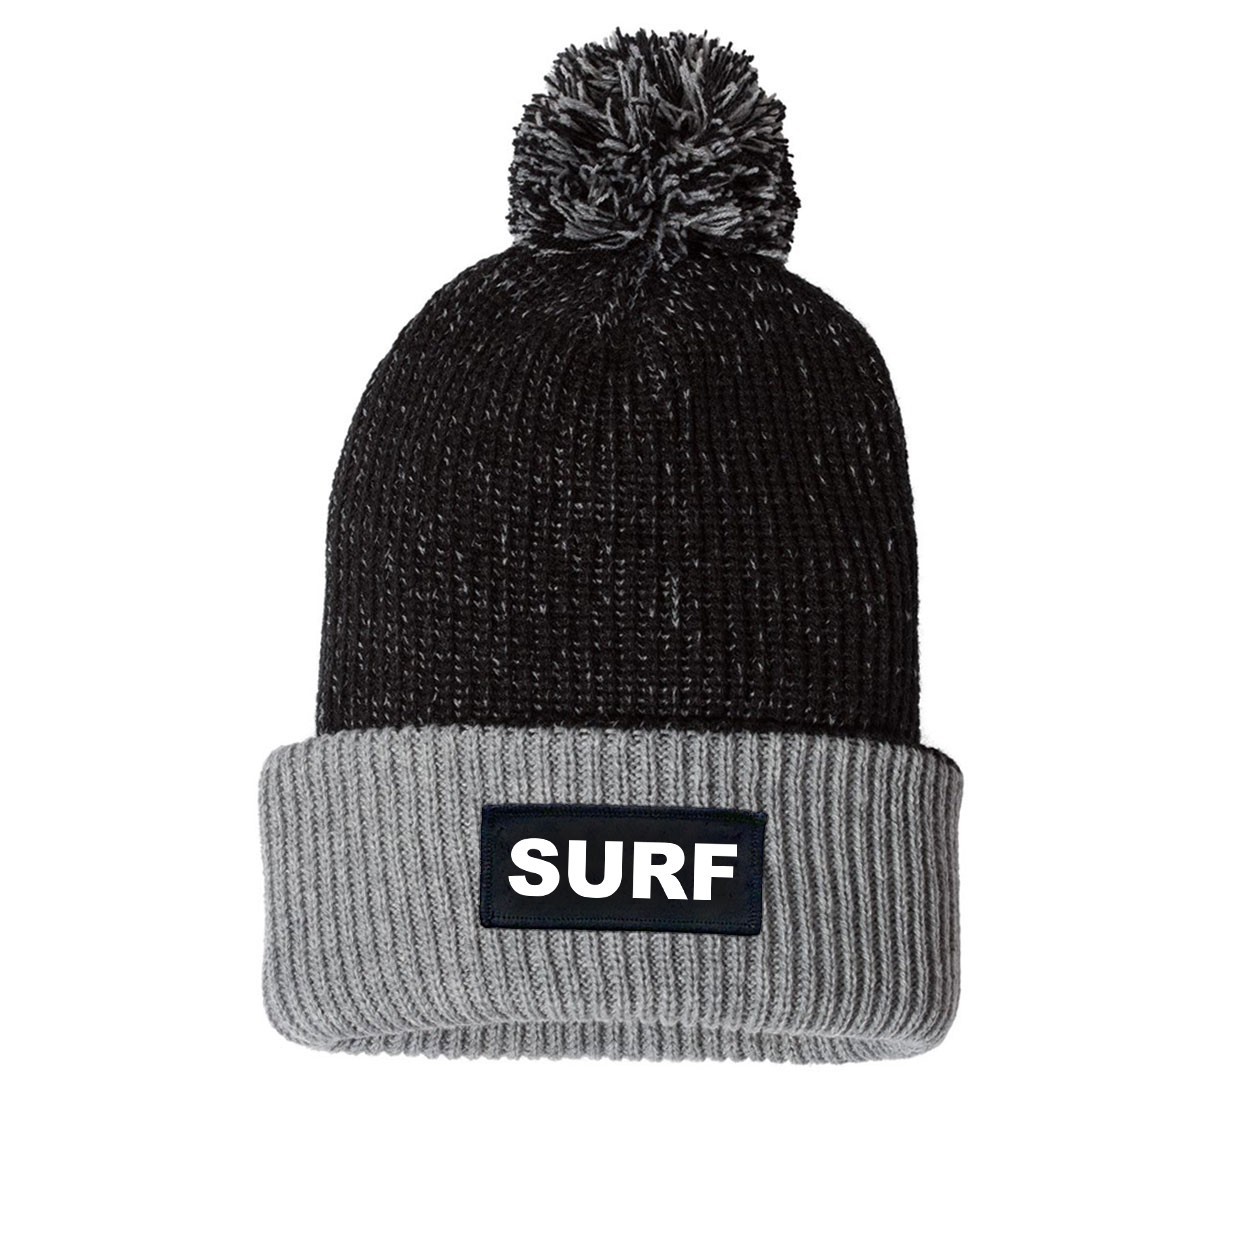 Surf Brand Logo Night Out Woven Patch Roll Up Pom Knit Beanie Black/Gray (White Logo)